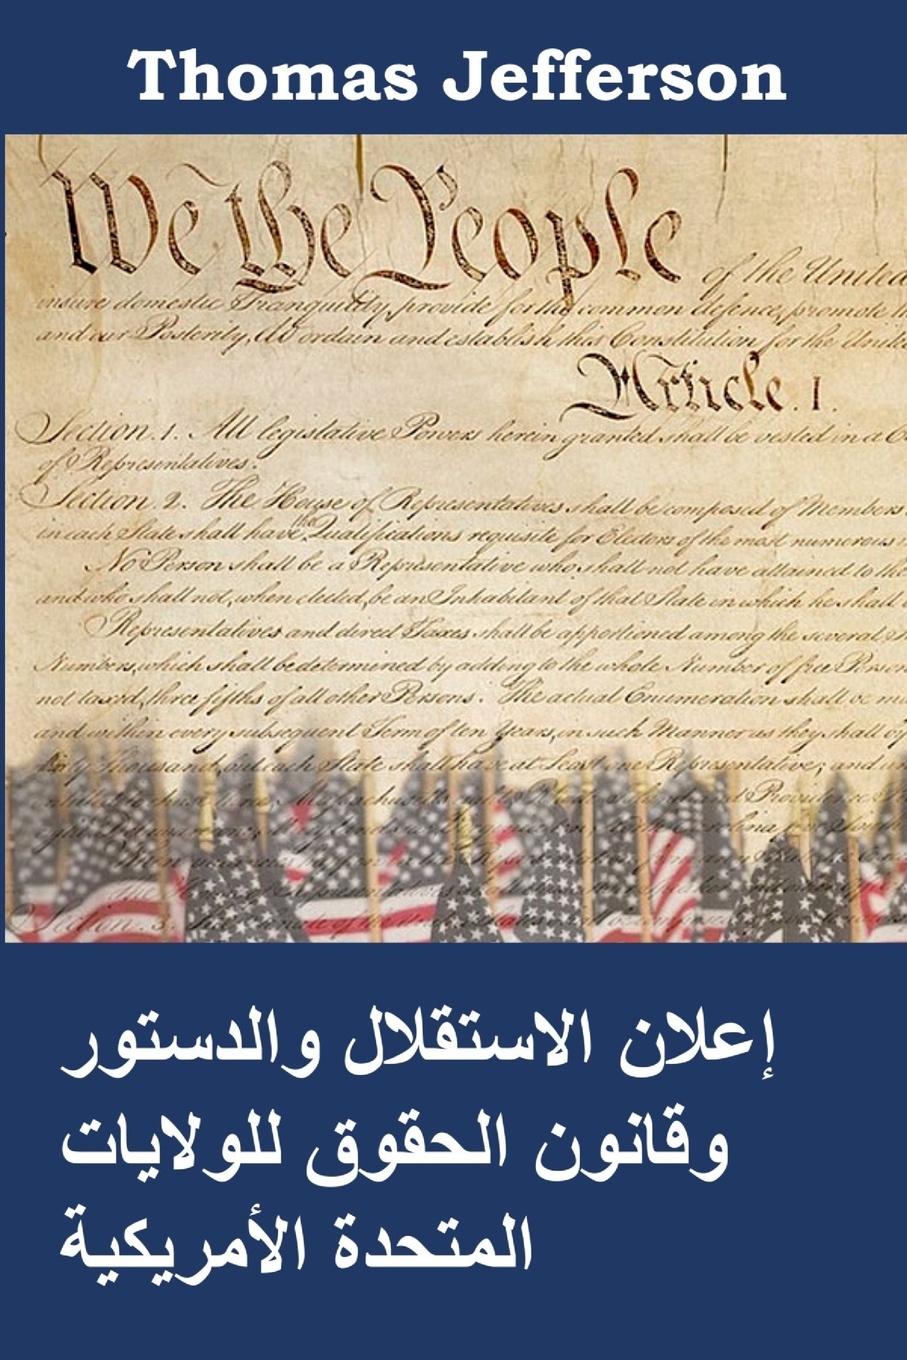 ????? ????????? ???????? ?????? ?????? ???????? ??????? ?????????. Declaration of Independence, Constitution, and Bill of Rights of the United States of America, Arabic edition